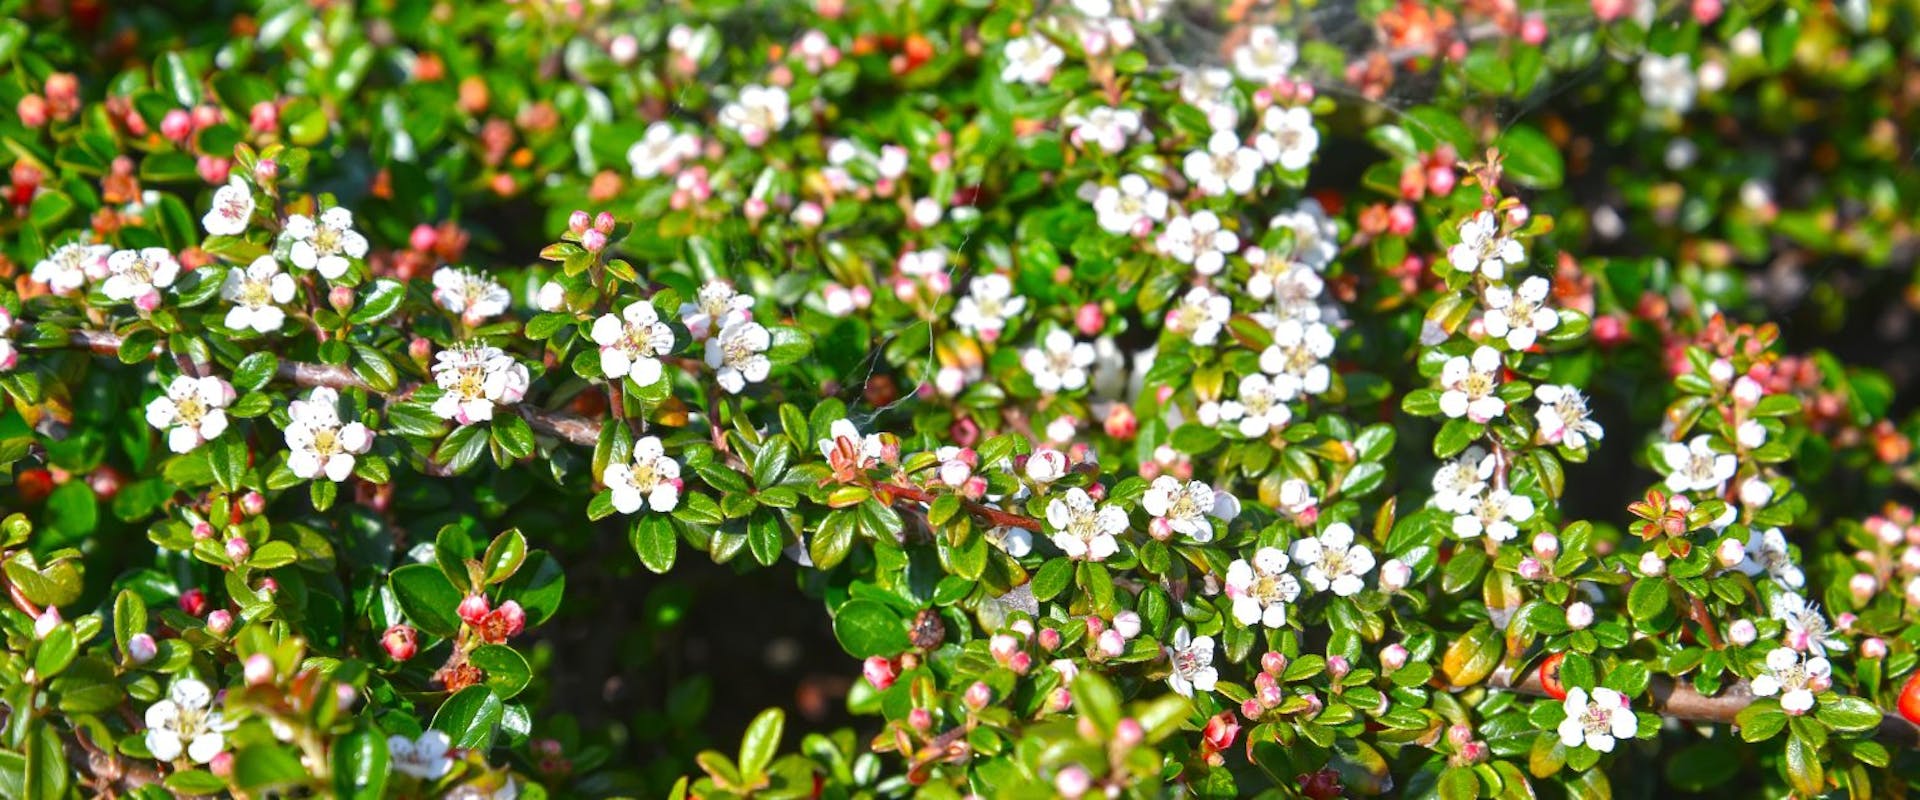 A cotoneaster plant with pink-white flowers in bloom.